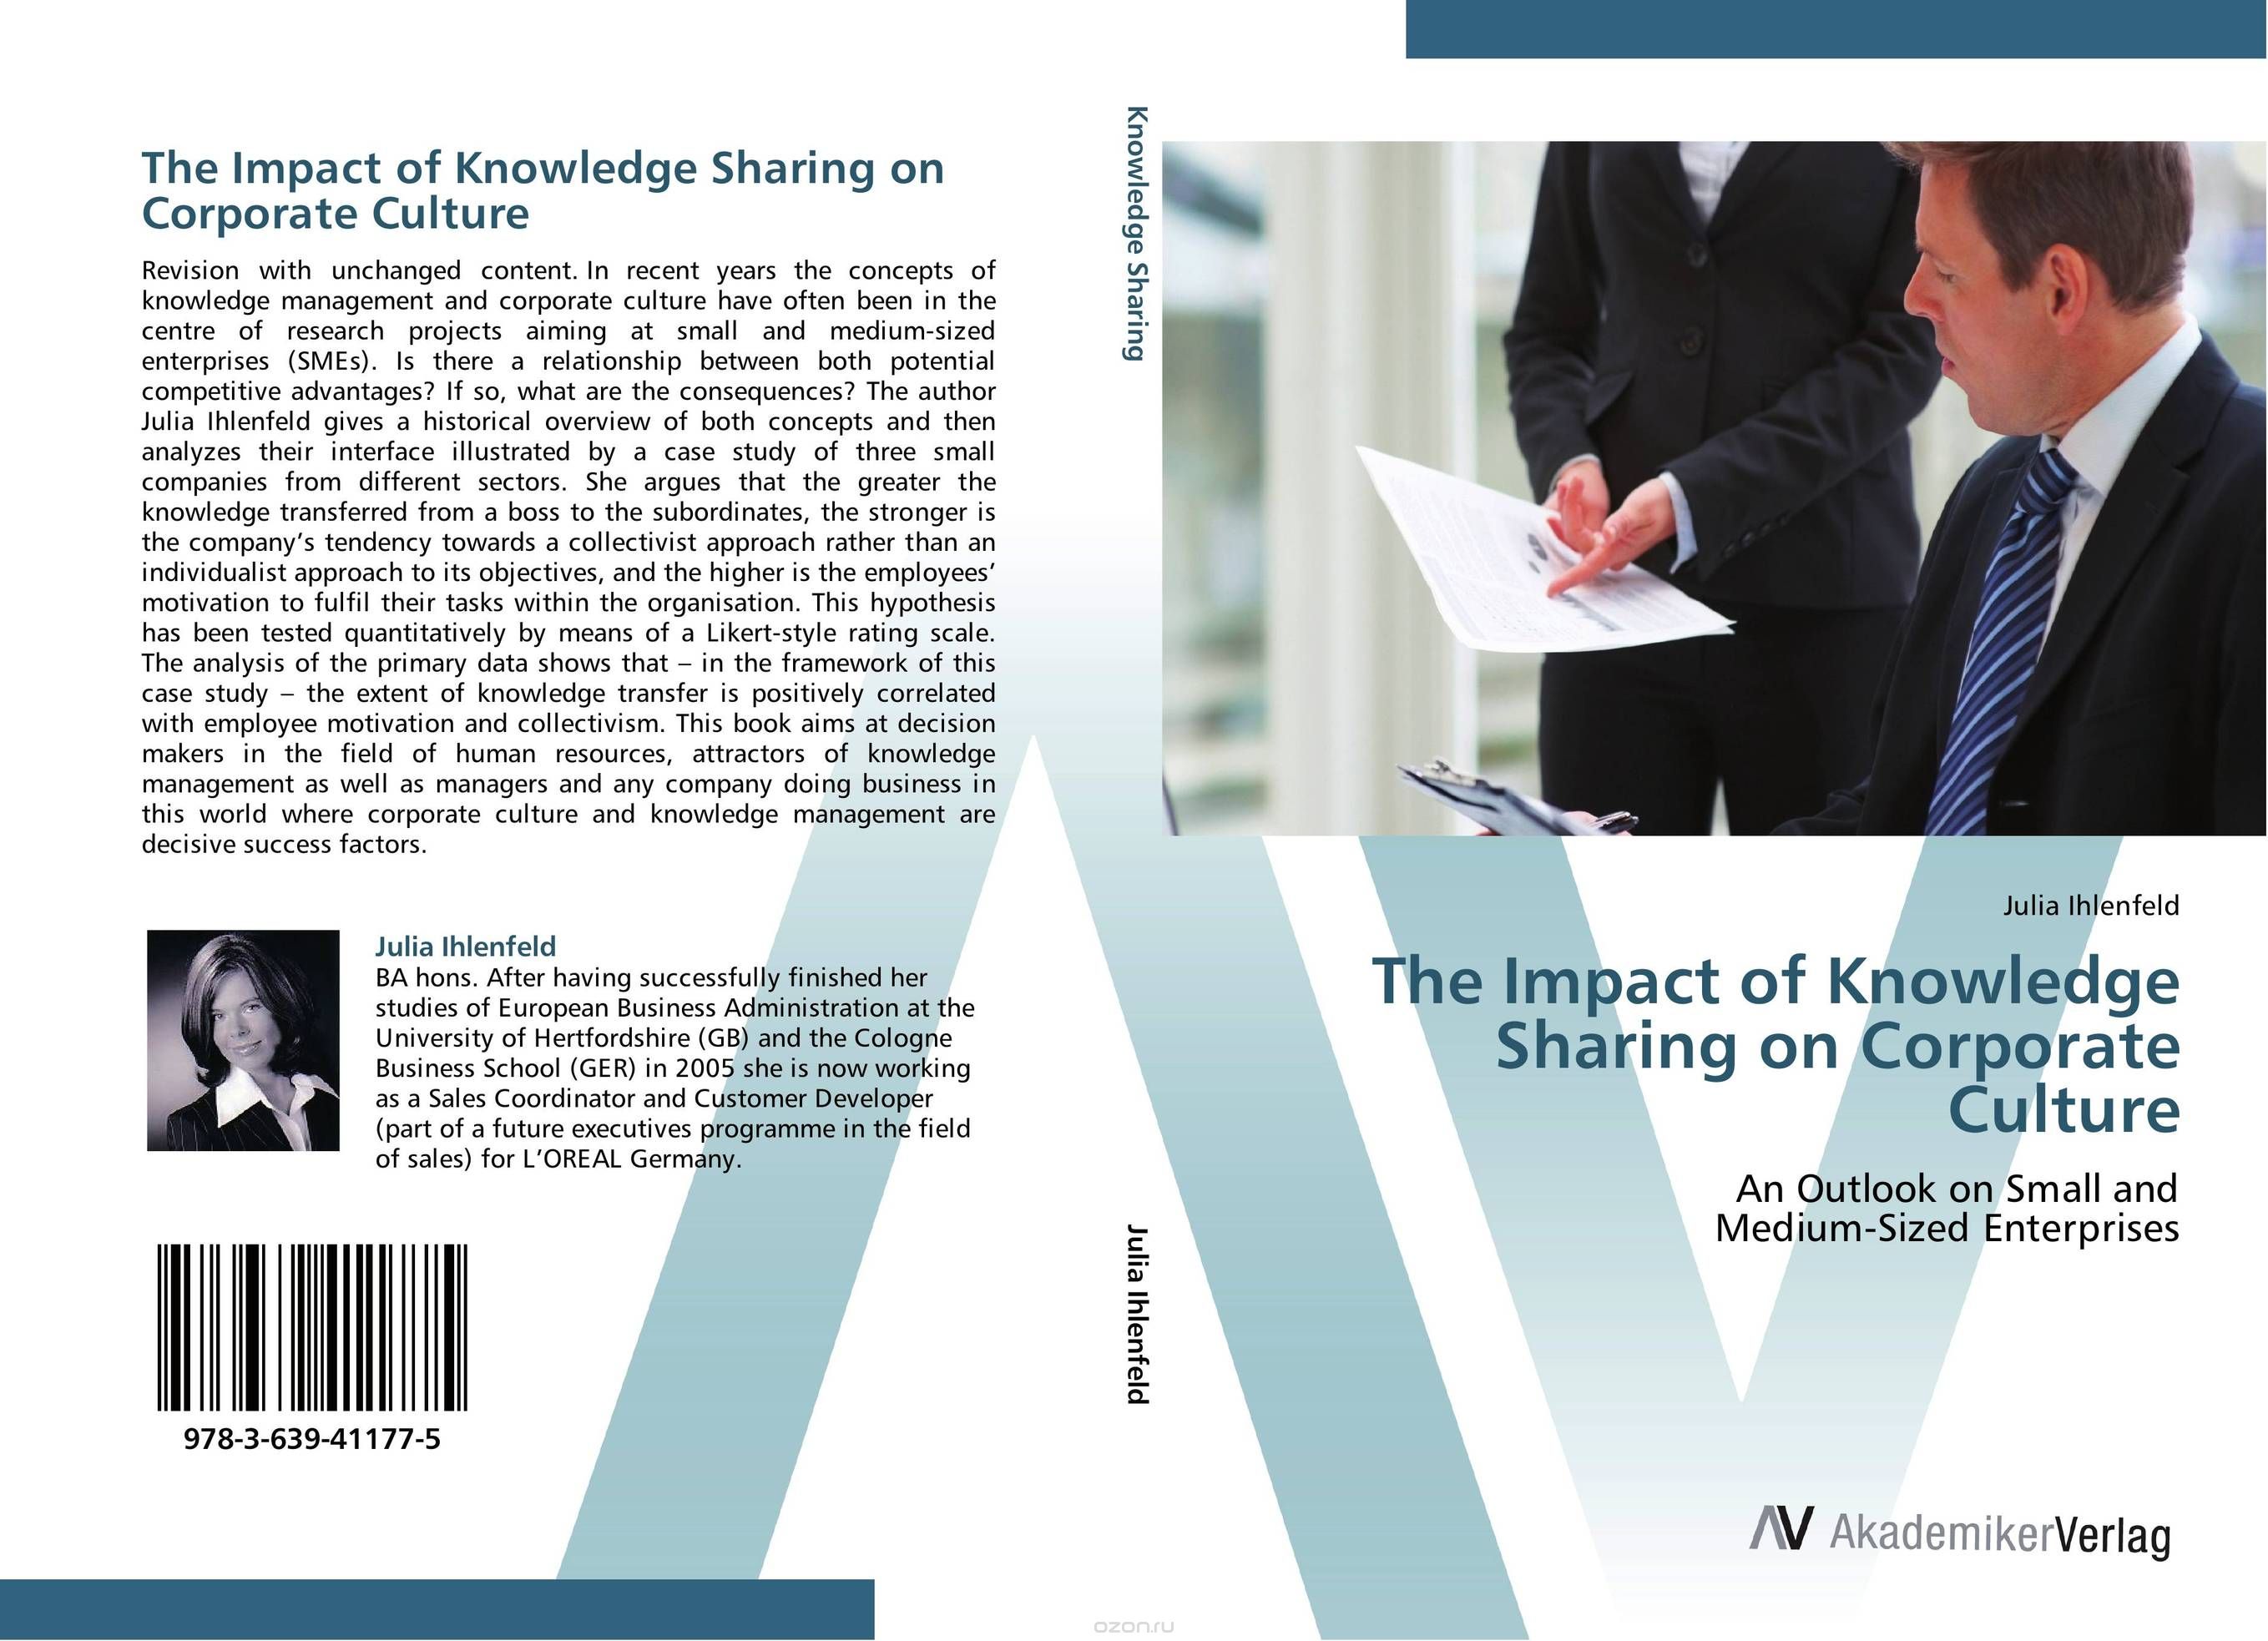 The Impact of Knowledge Sharing on Corporate Culture